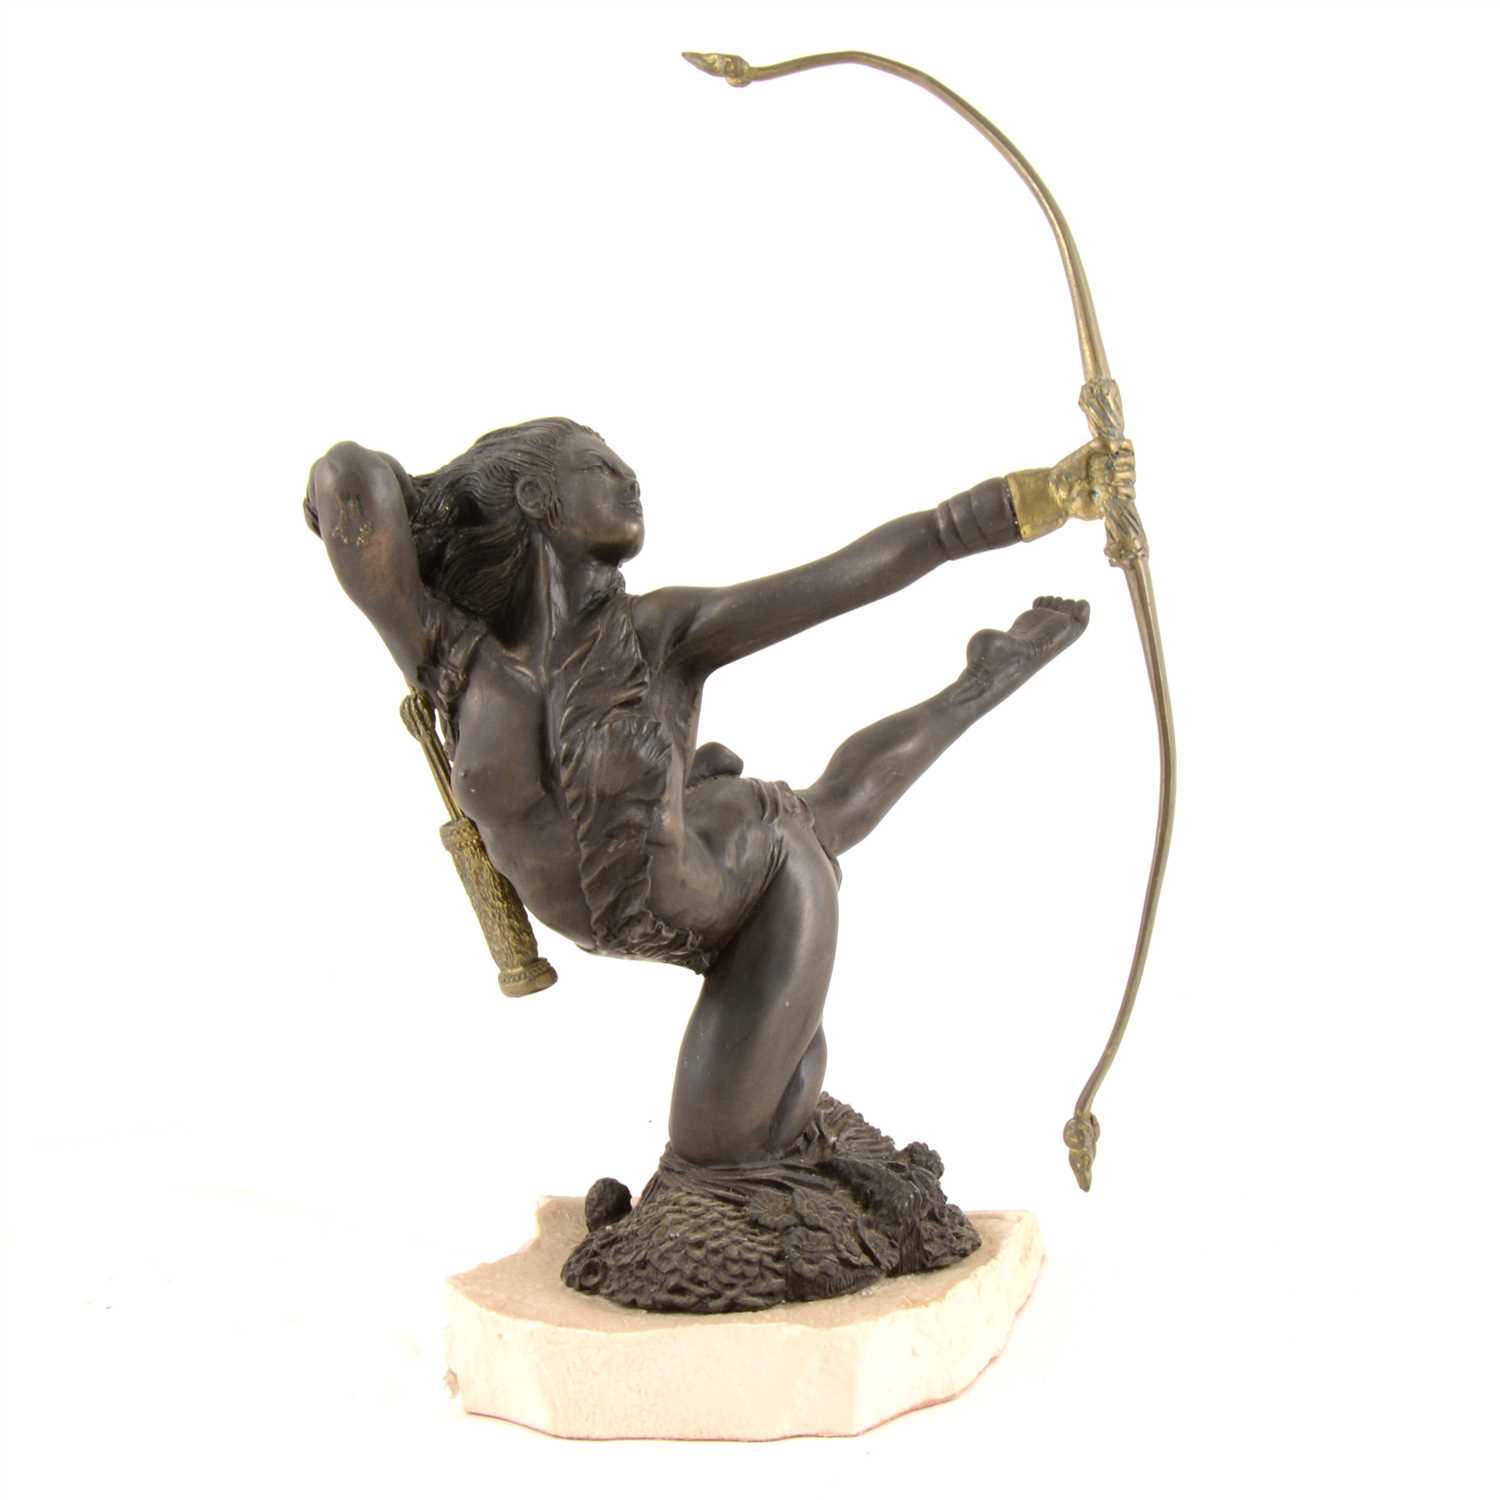 Lot 166 - An Heredities model of Diana The Huntress, with display board, 25cm.